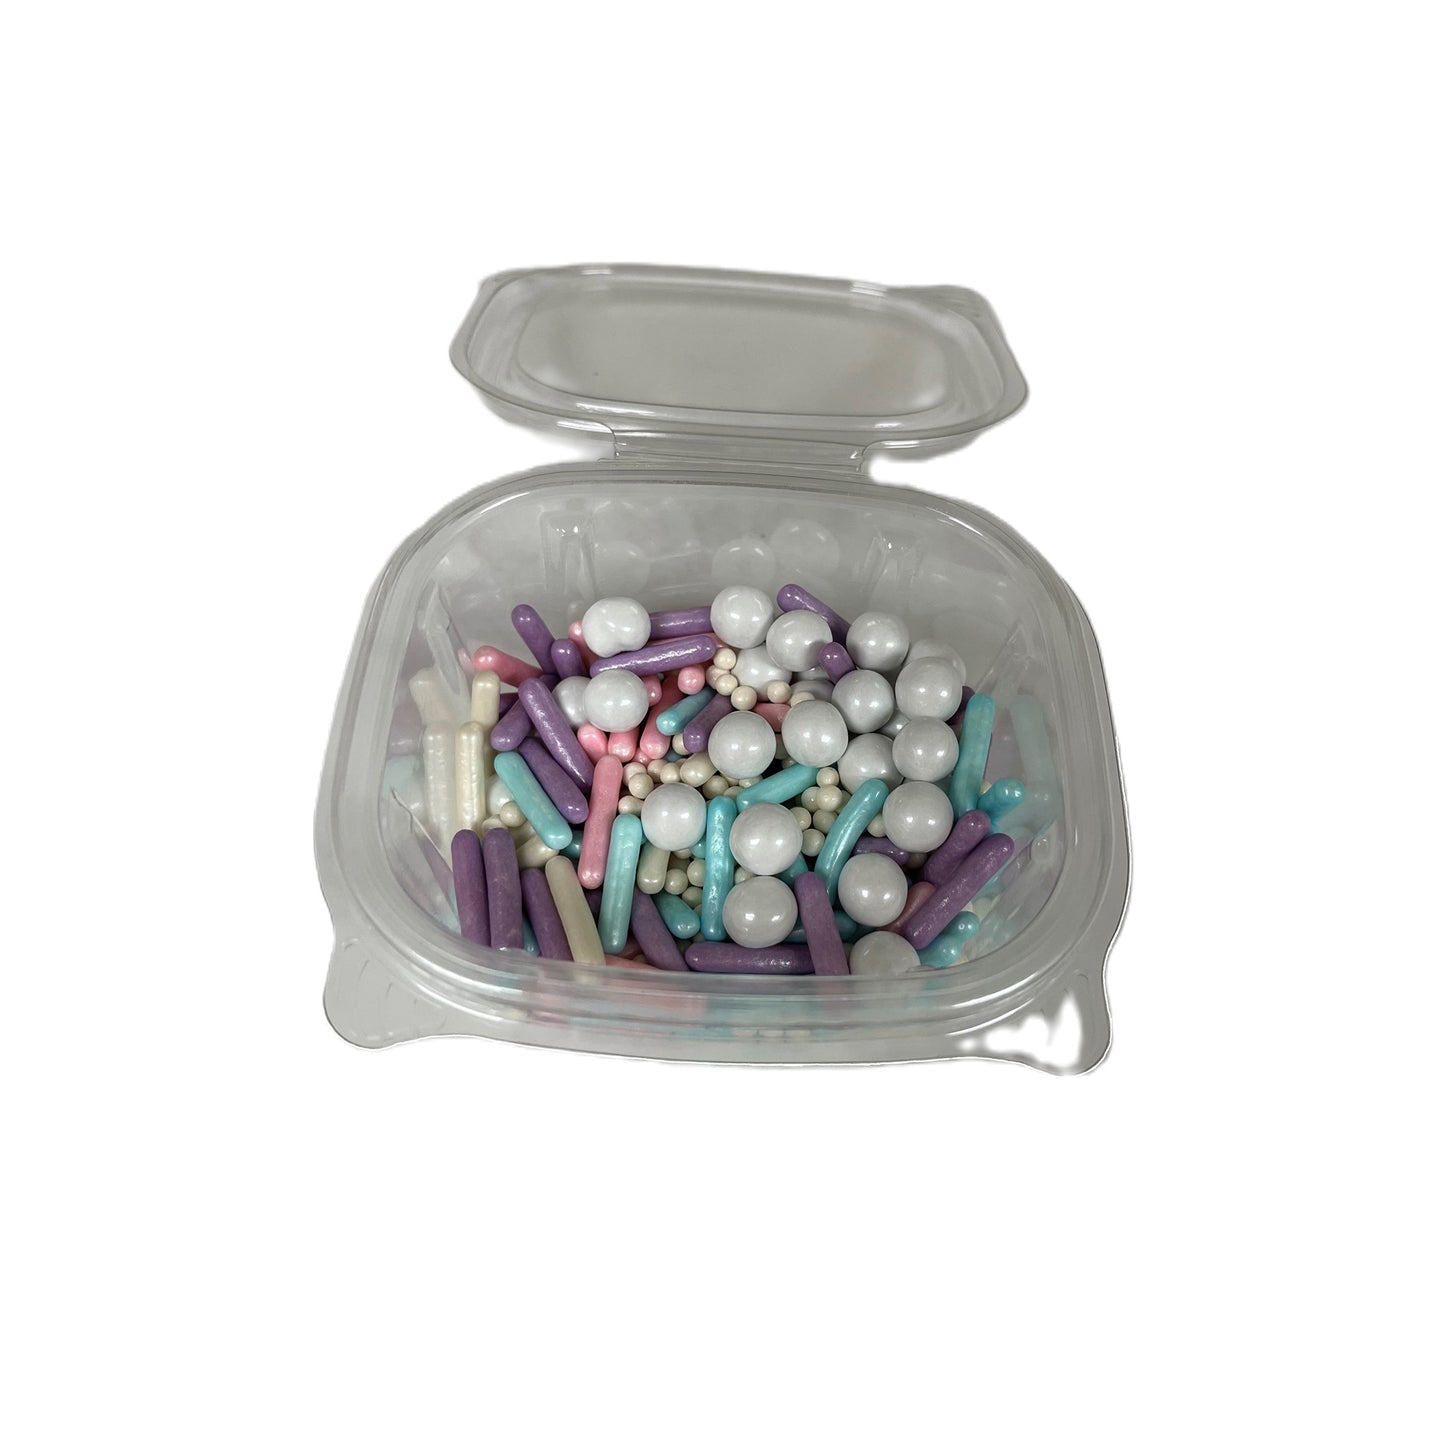 Container filled with a vibrant mix of candy sprinkles in various shapes and pastel colors, ideal for decorating cakes and cupcakes, available at Lynn's Cake, Candy, and Chocolate Supplies.